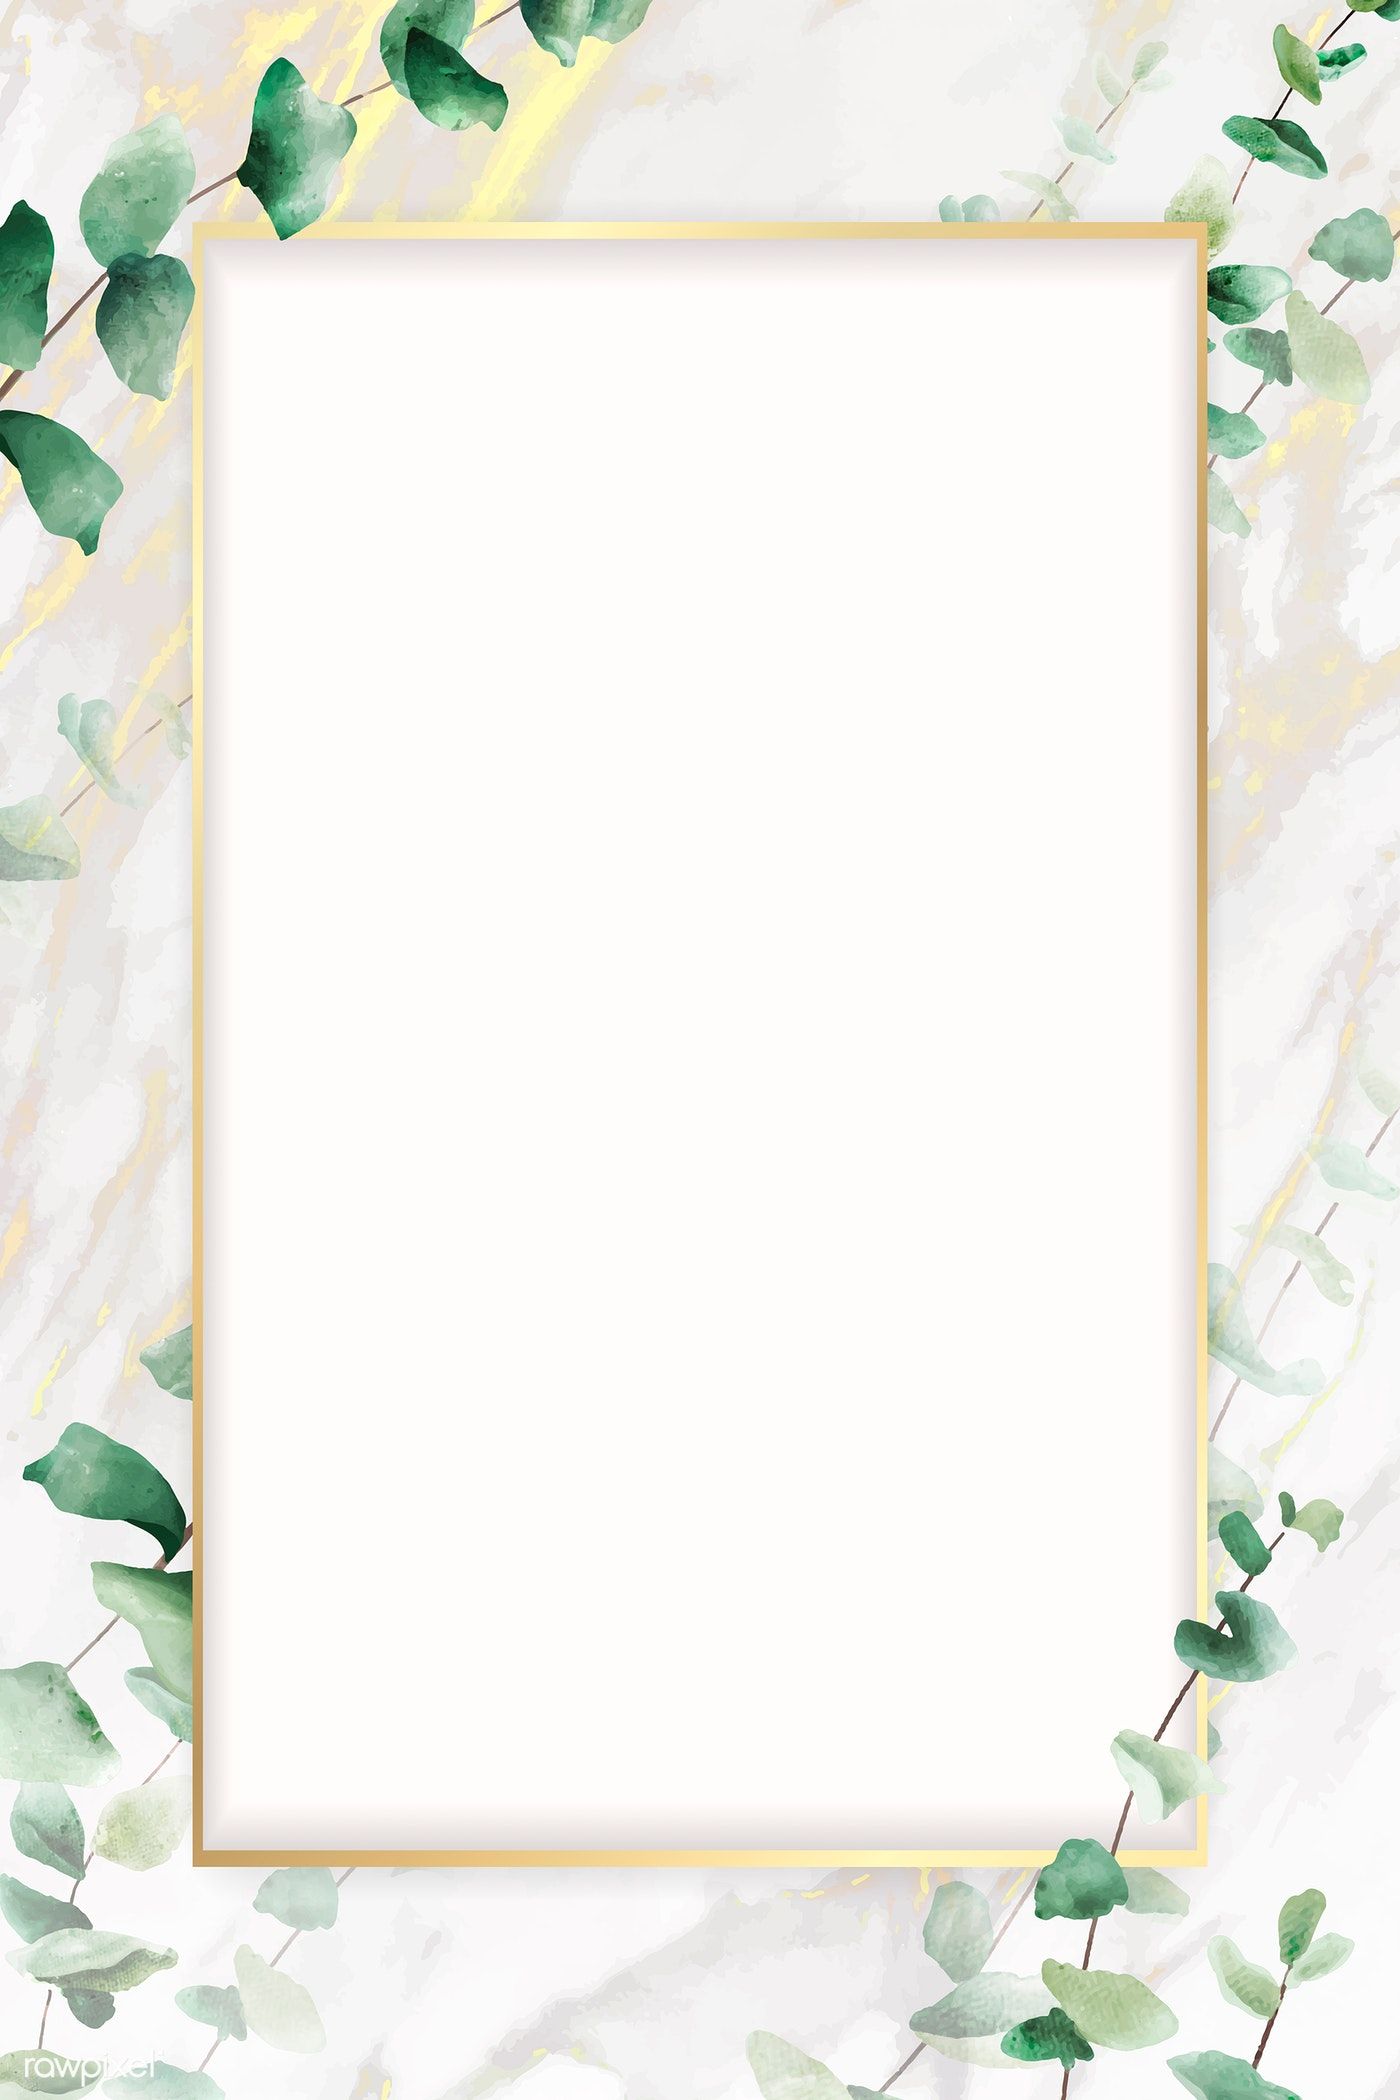 Download premium vector of Hand drawn eucalyptus leaf with rectangle gold frame vector by Adjima about eucalyptus, greenery gold frame, greenery frame,. How to draw hands, Flower background wallpaper, Frame